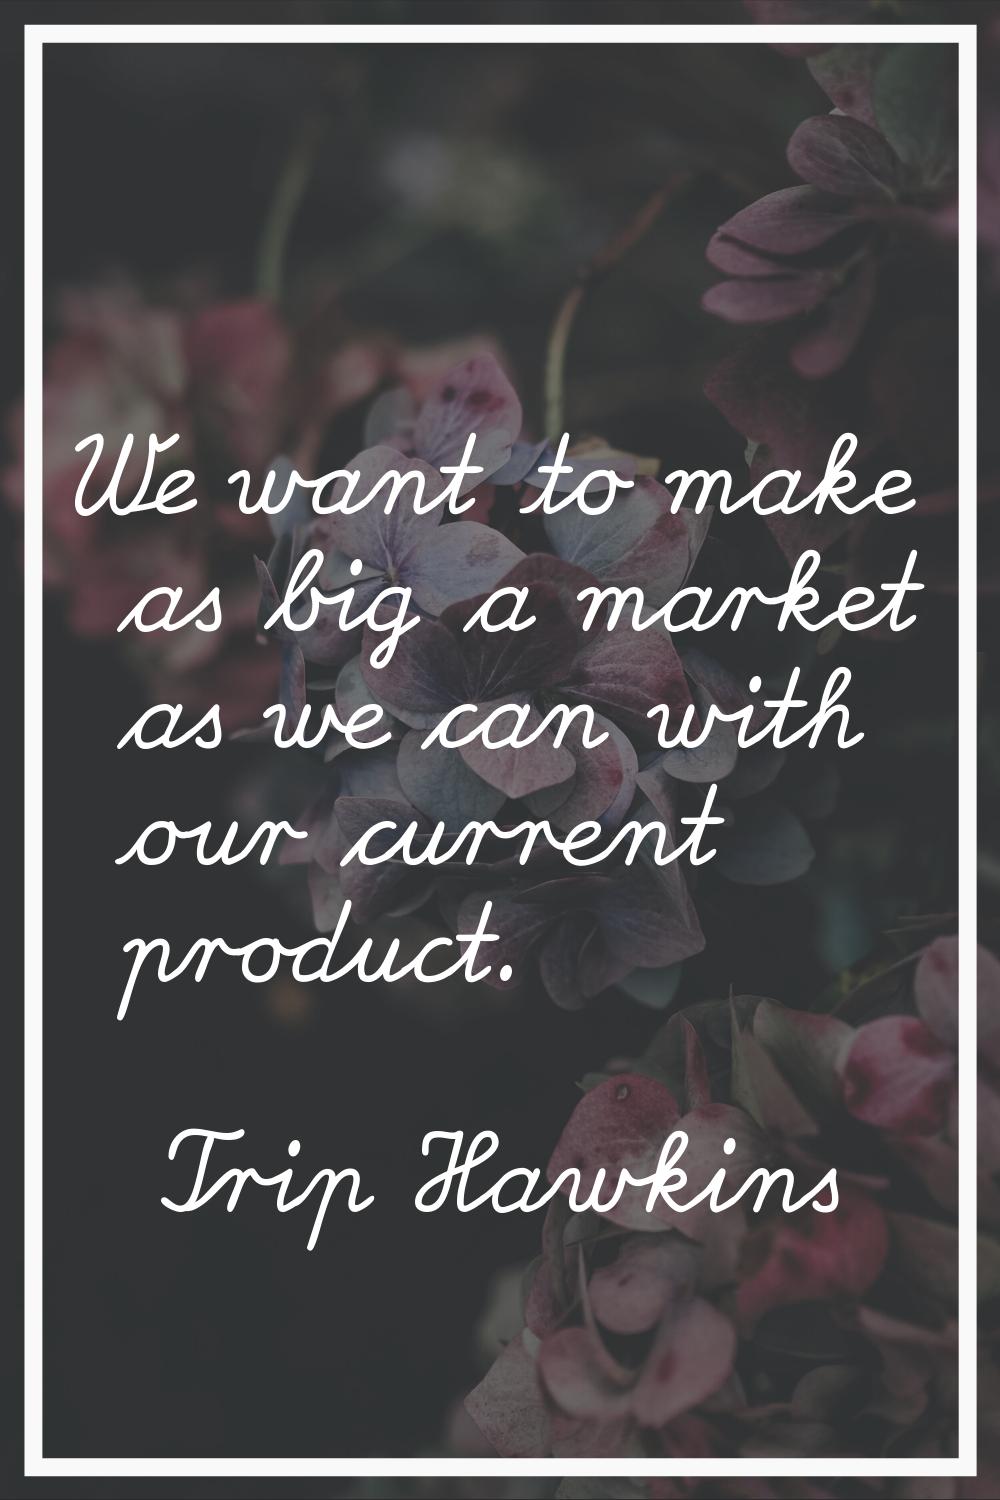 We want to make as big a market as we can with our current product.